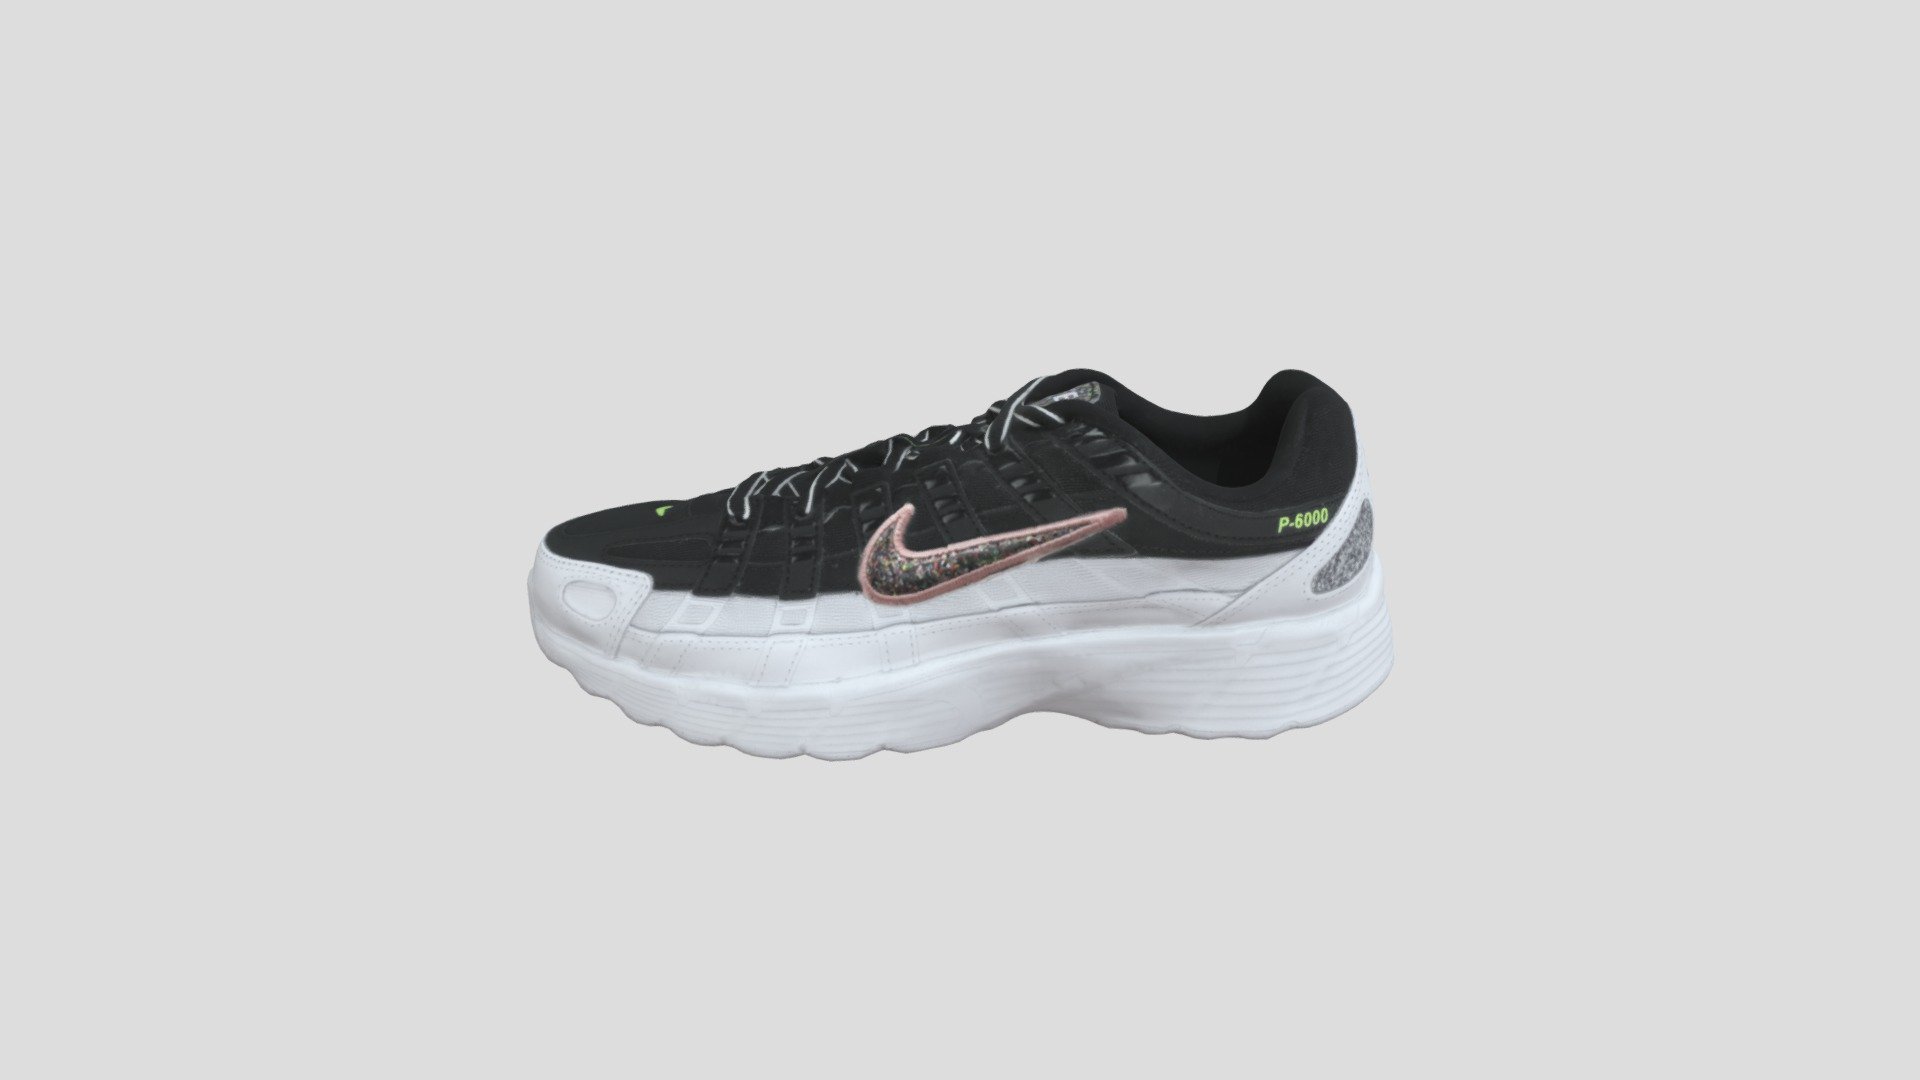 This model was created firstly by 3D scanning on retail version, and then being detail-improved manually, thus a 1:1 repulica of the original
PBR ready
Low-poly
4K texture
Welcome to check out other models we have to offer. And we do accept custom orders as well :) - Nike P-6000 黑白粉 女款_CJ9585-001 - Buy Royalty Free 3D model by TRARGUS 3d model